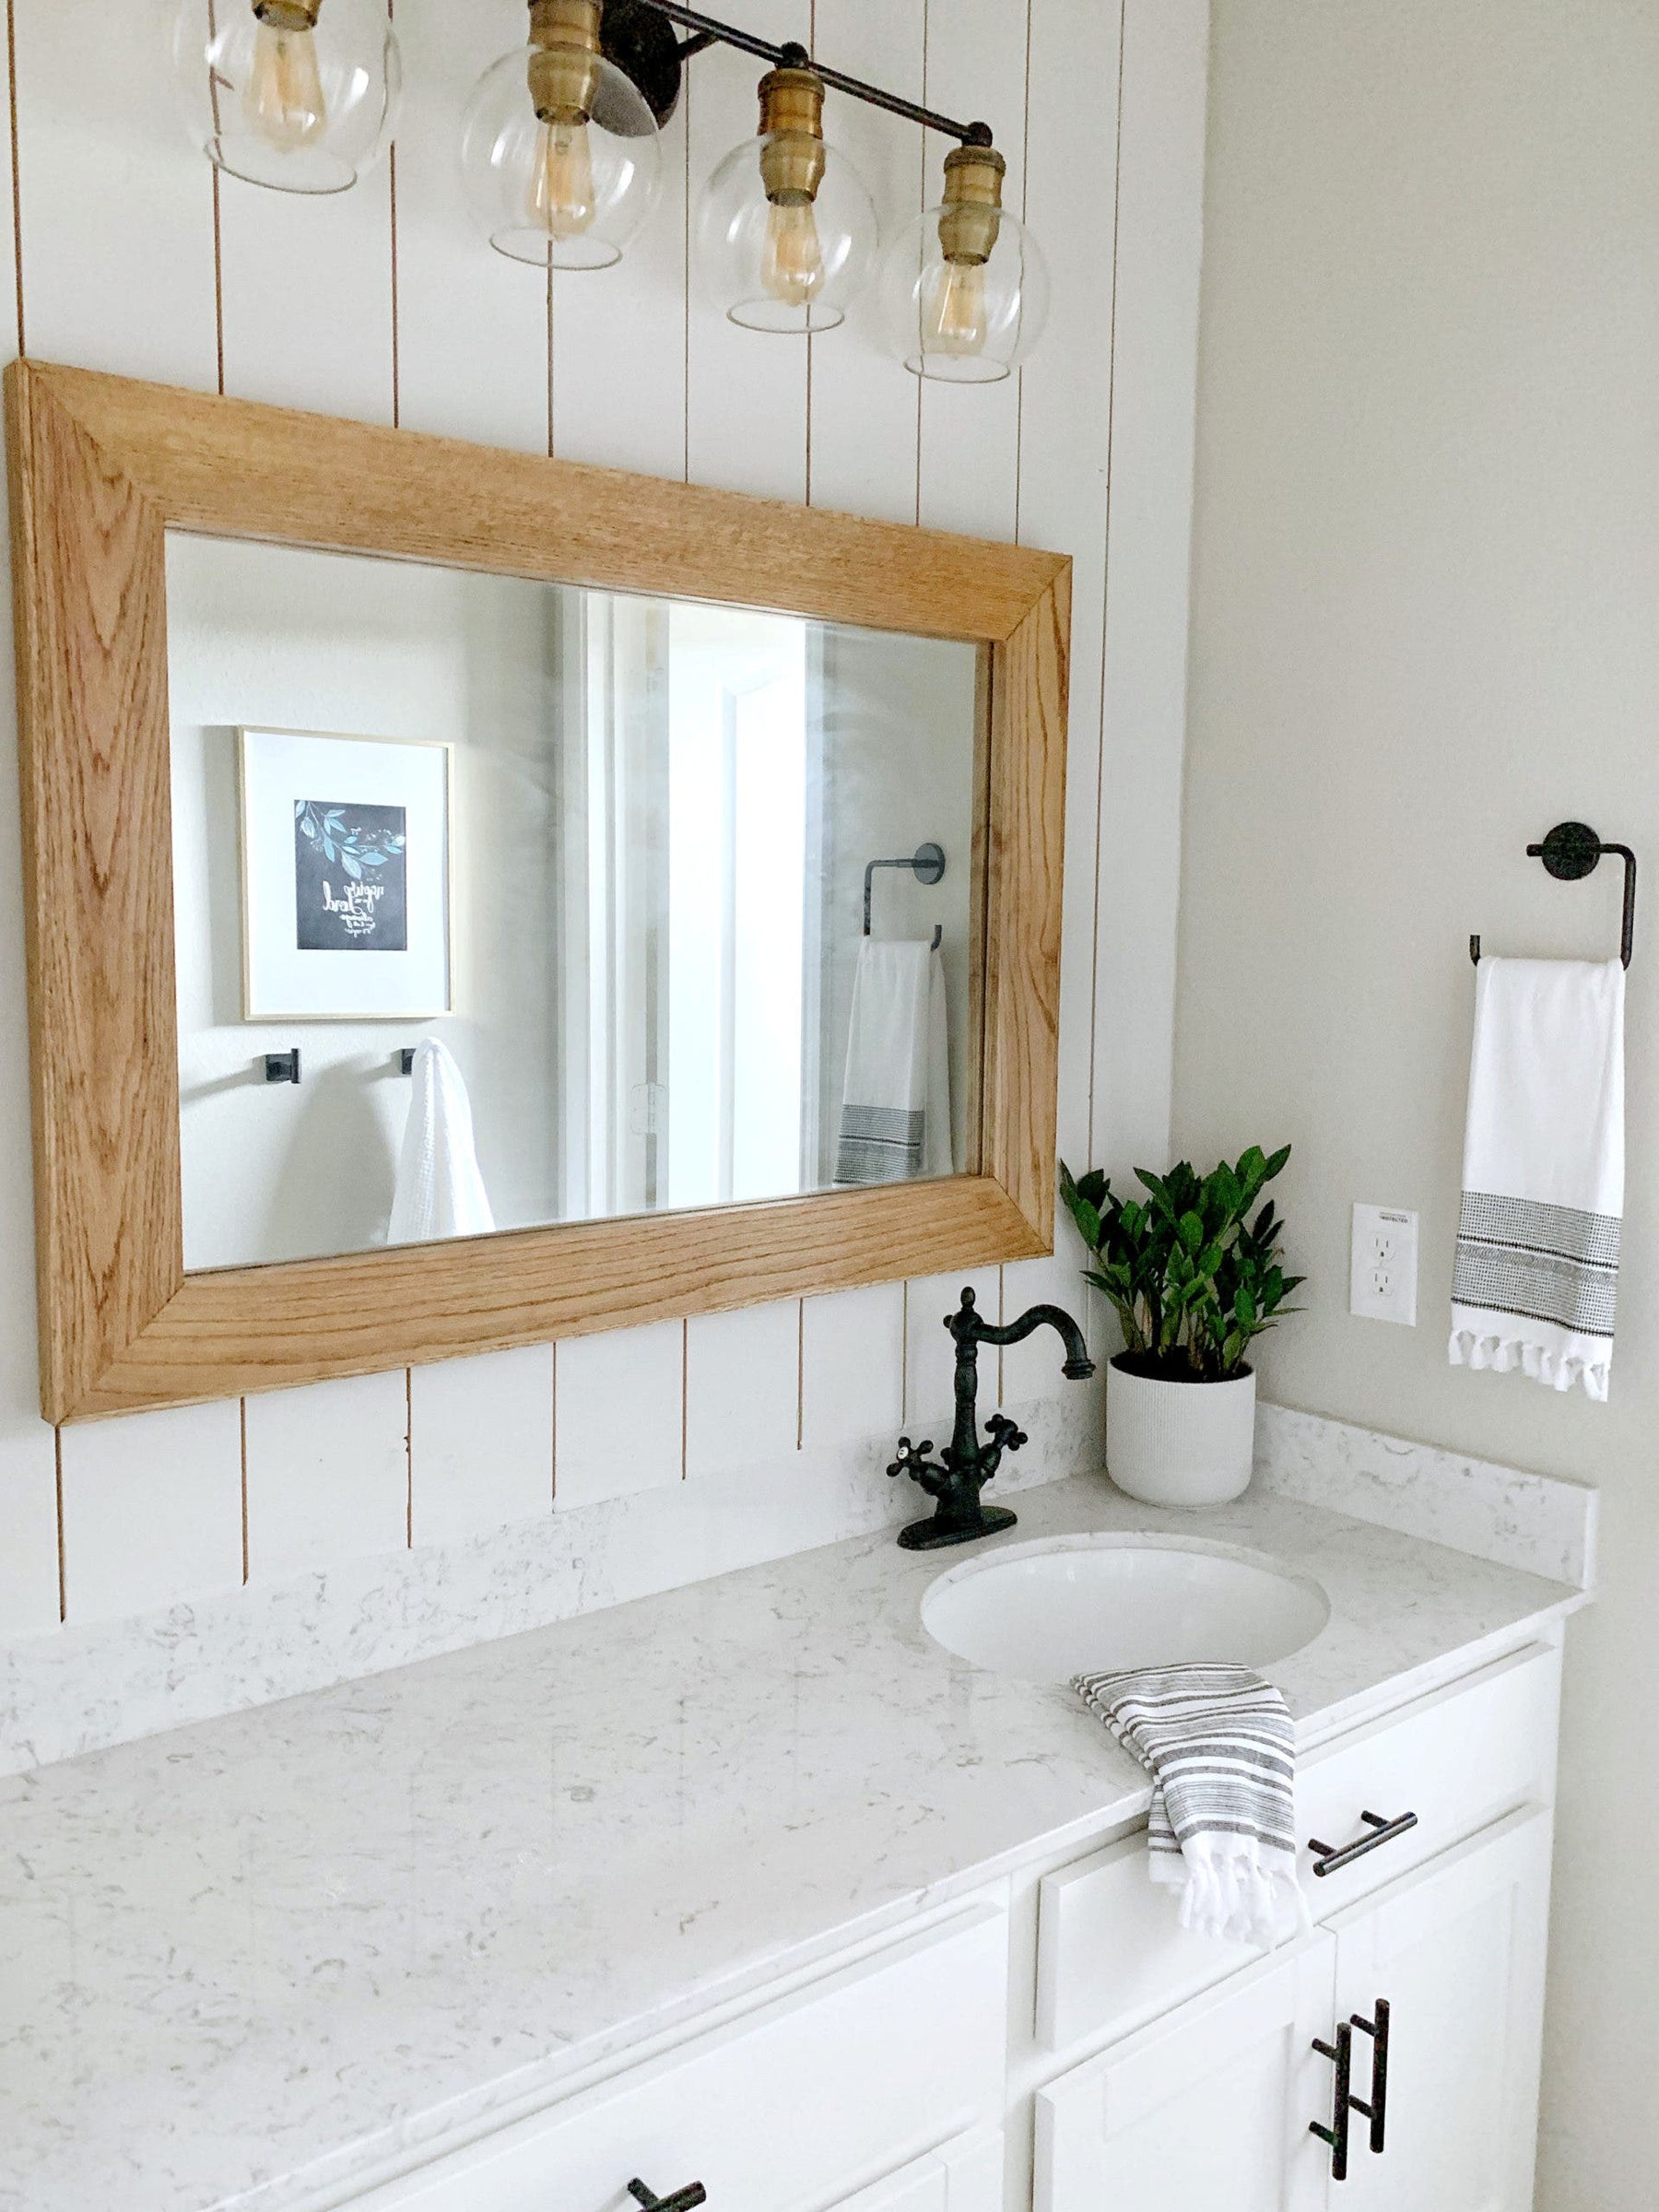 Tips for Designing a Scandinavian-Style Bathroom